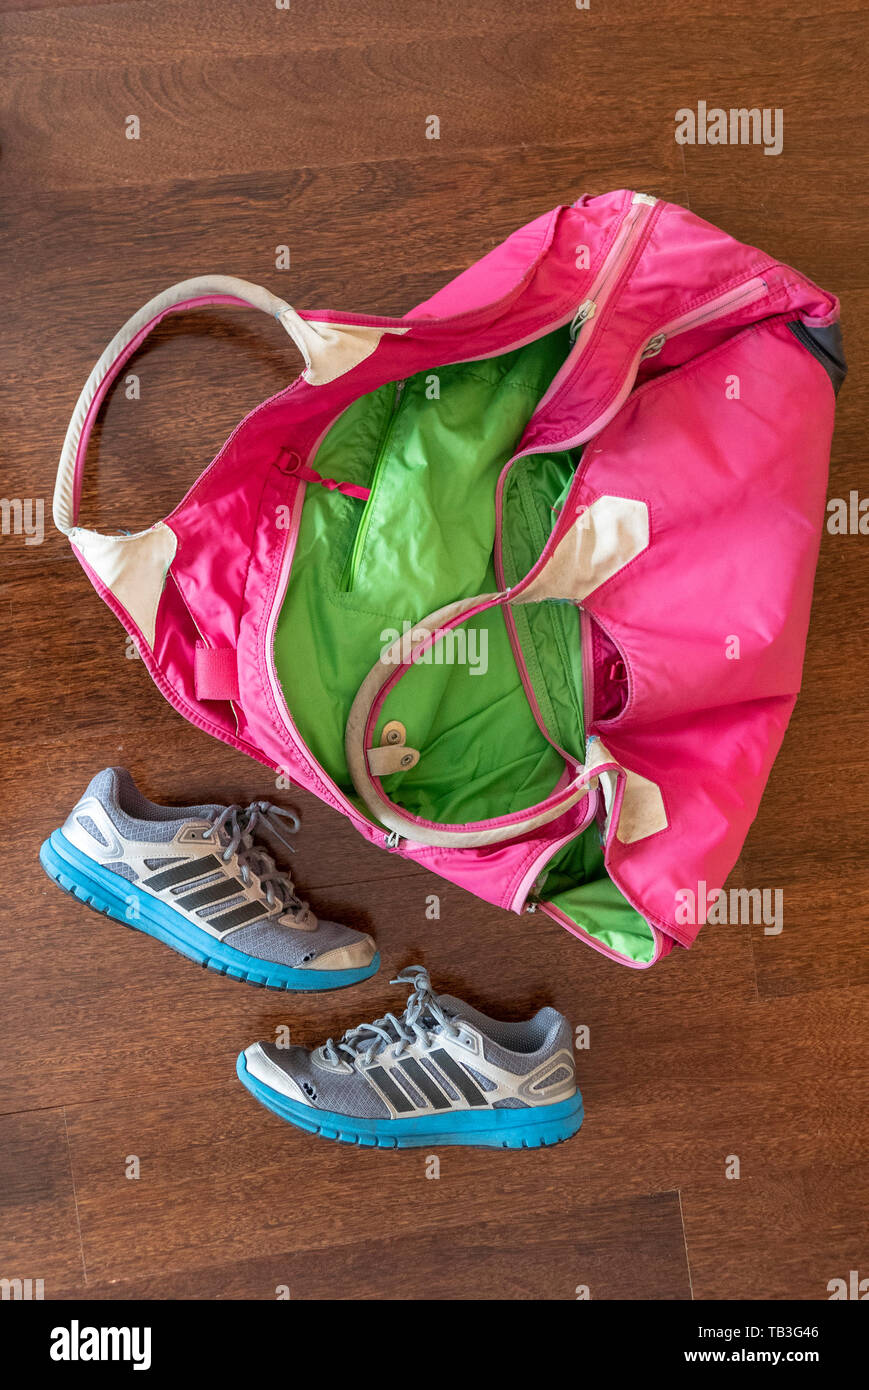 Worn pink gym bag and blue Adidas sneakers Stock Photo